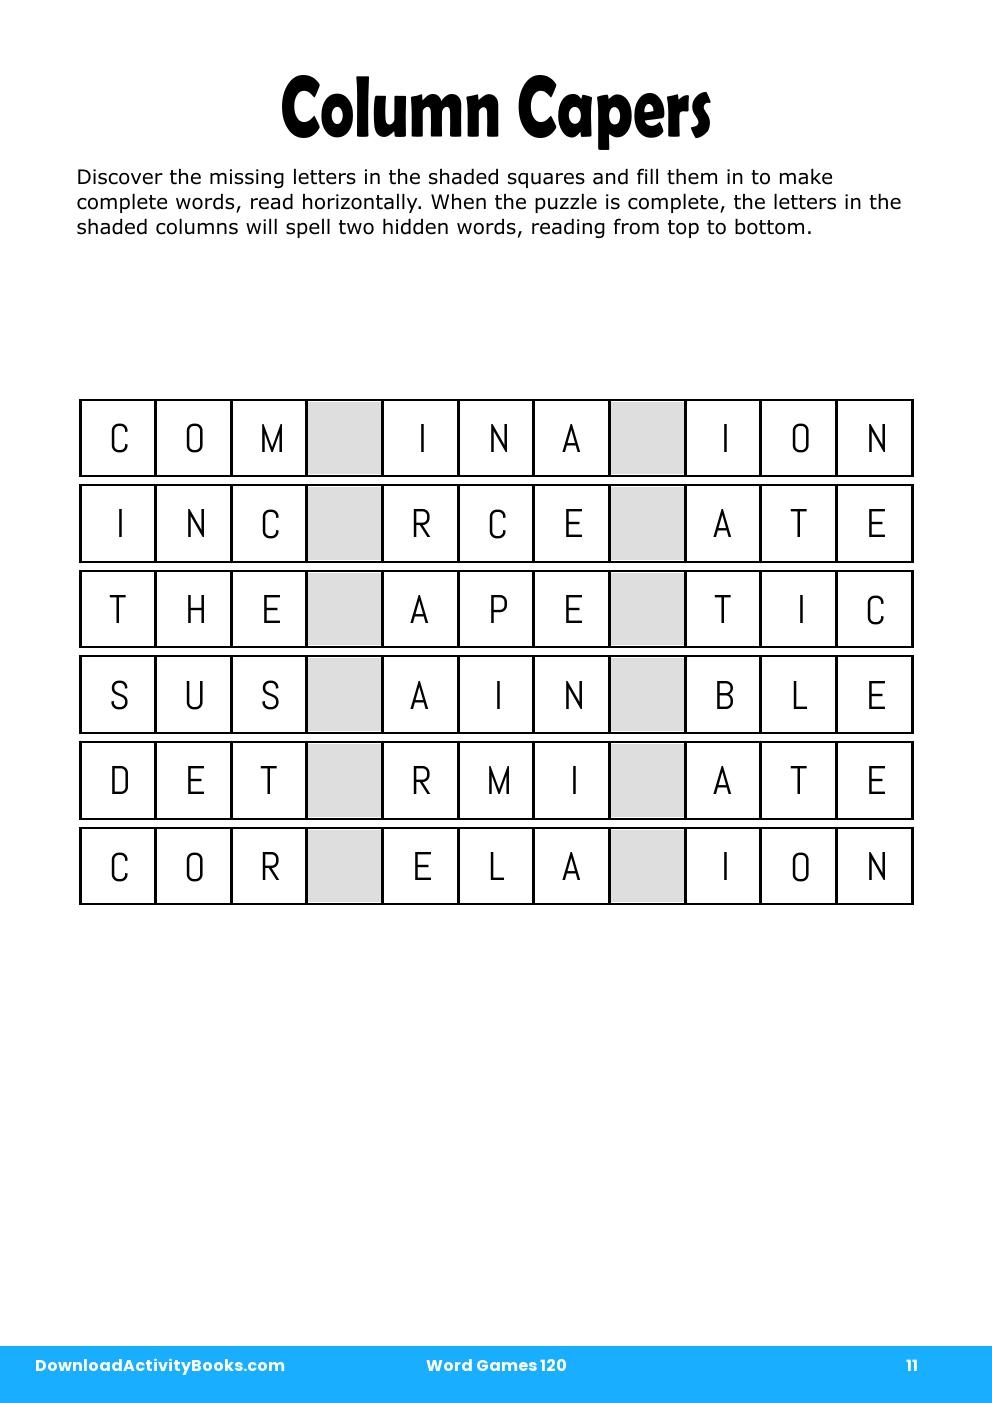 Column Capers in Word Games 120